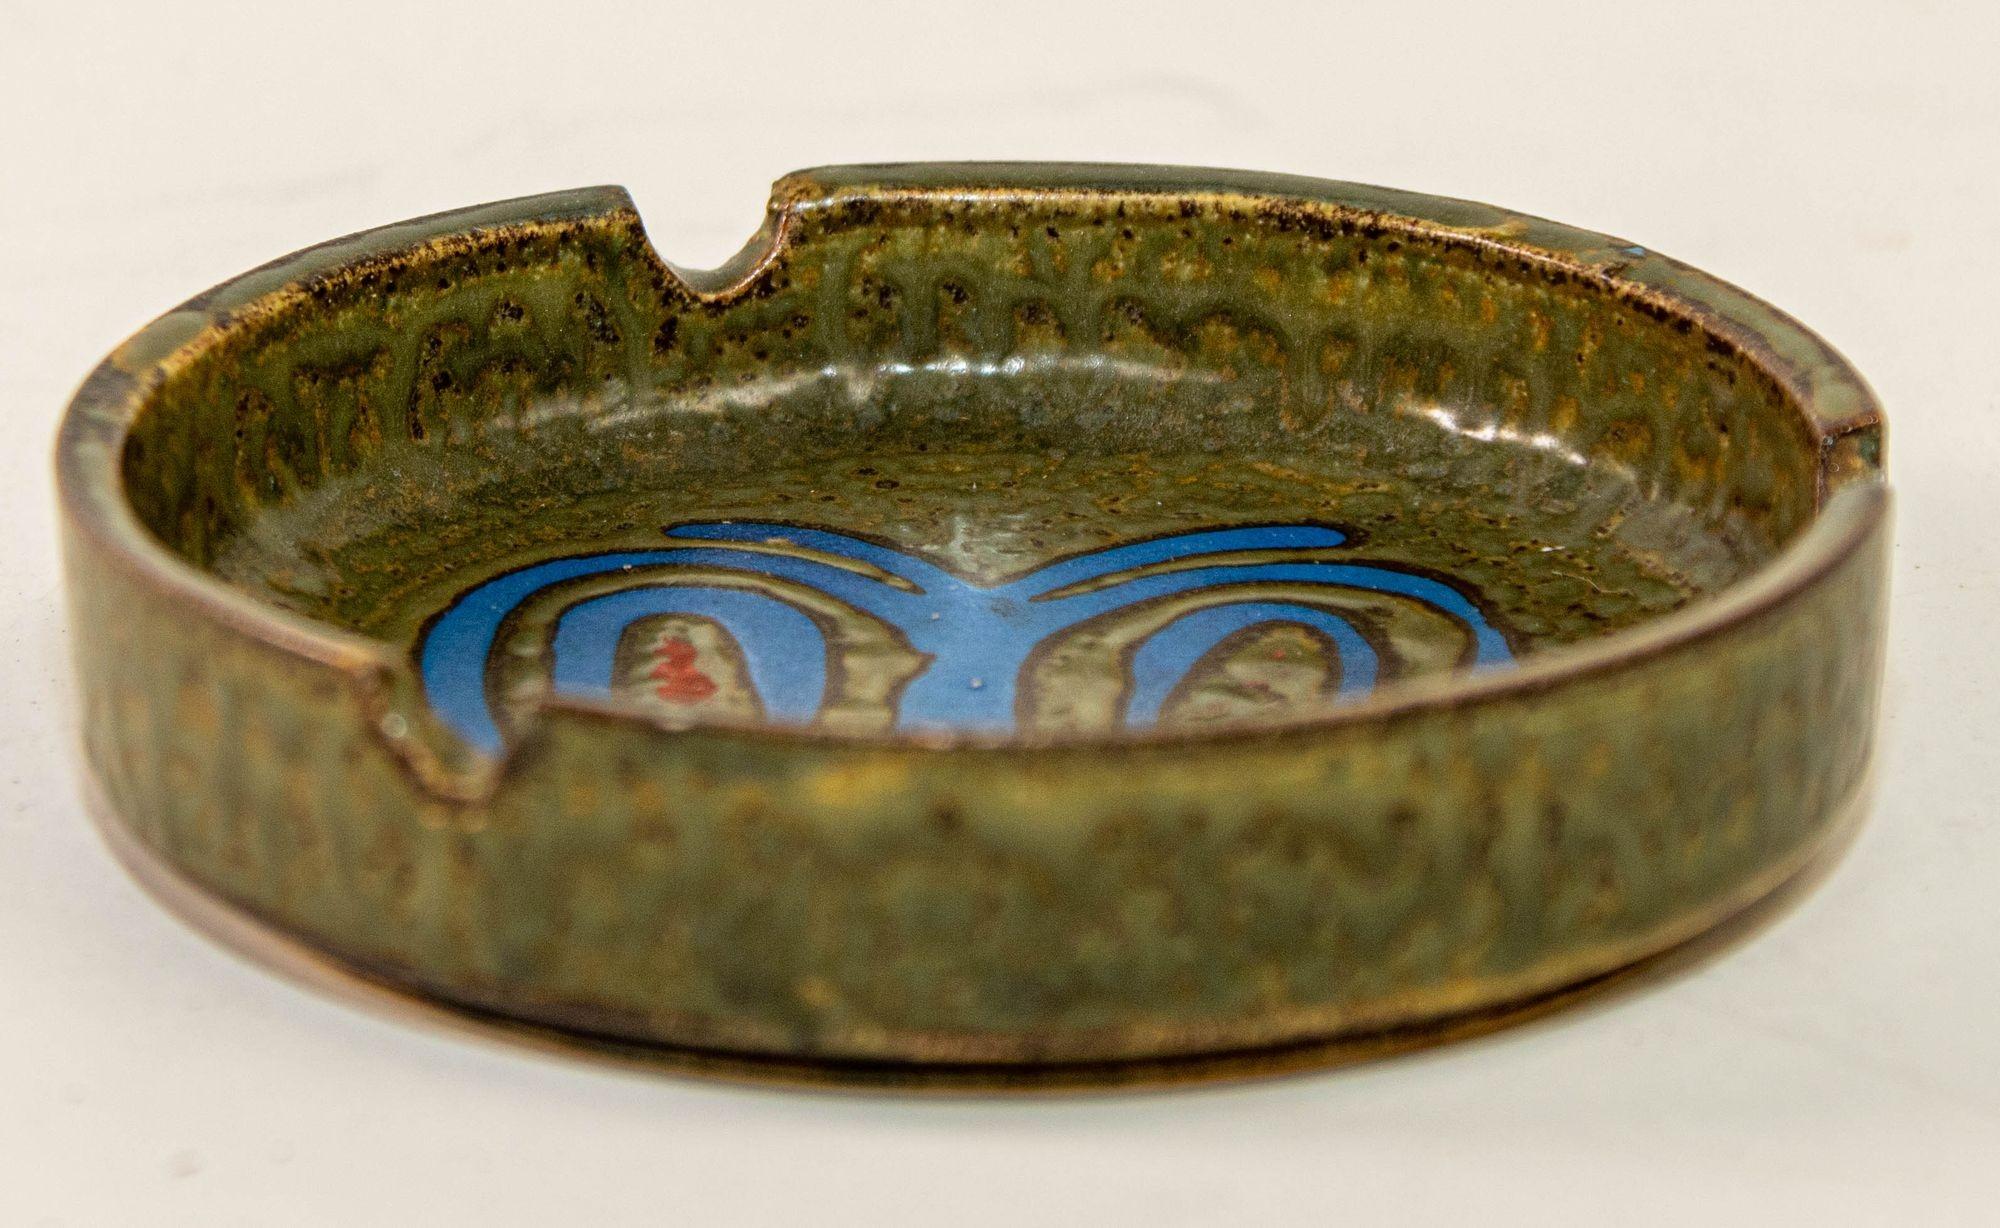 Great Vintage Mid-Century 1960s handcrafted Pottery Ashtray in Earthy Matte Green with Blue Butterfly.
Vintage design studio round stoneware dish ceramic glazed ash tray with hand painted butterfly.
Handmade circular form stoneware dish with earthy